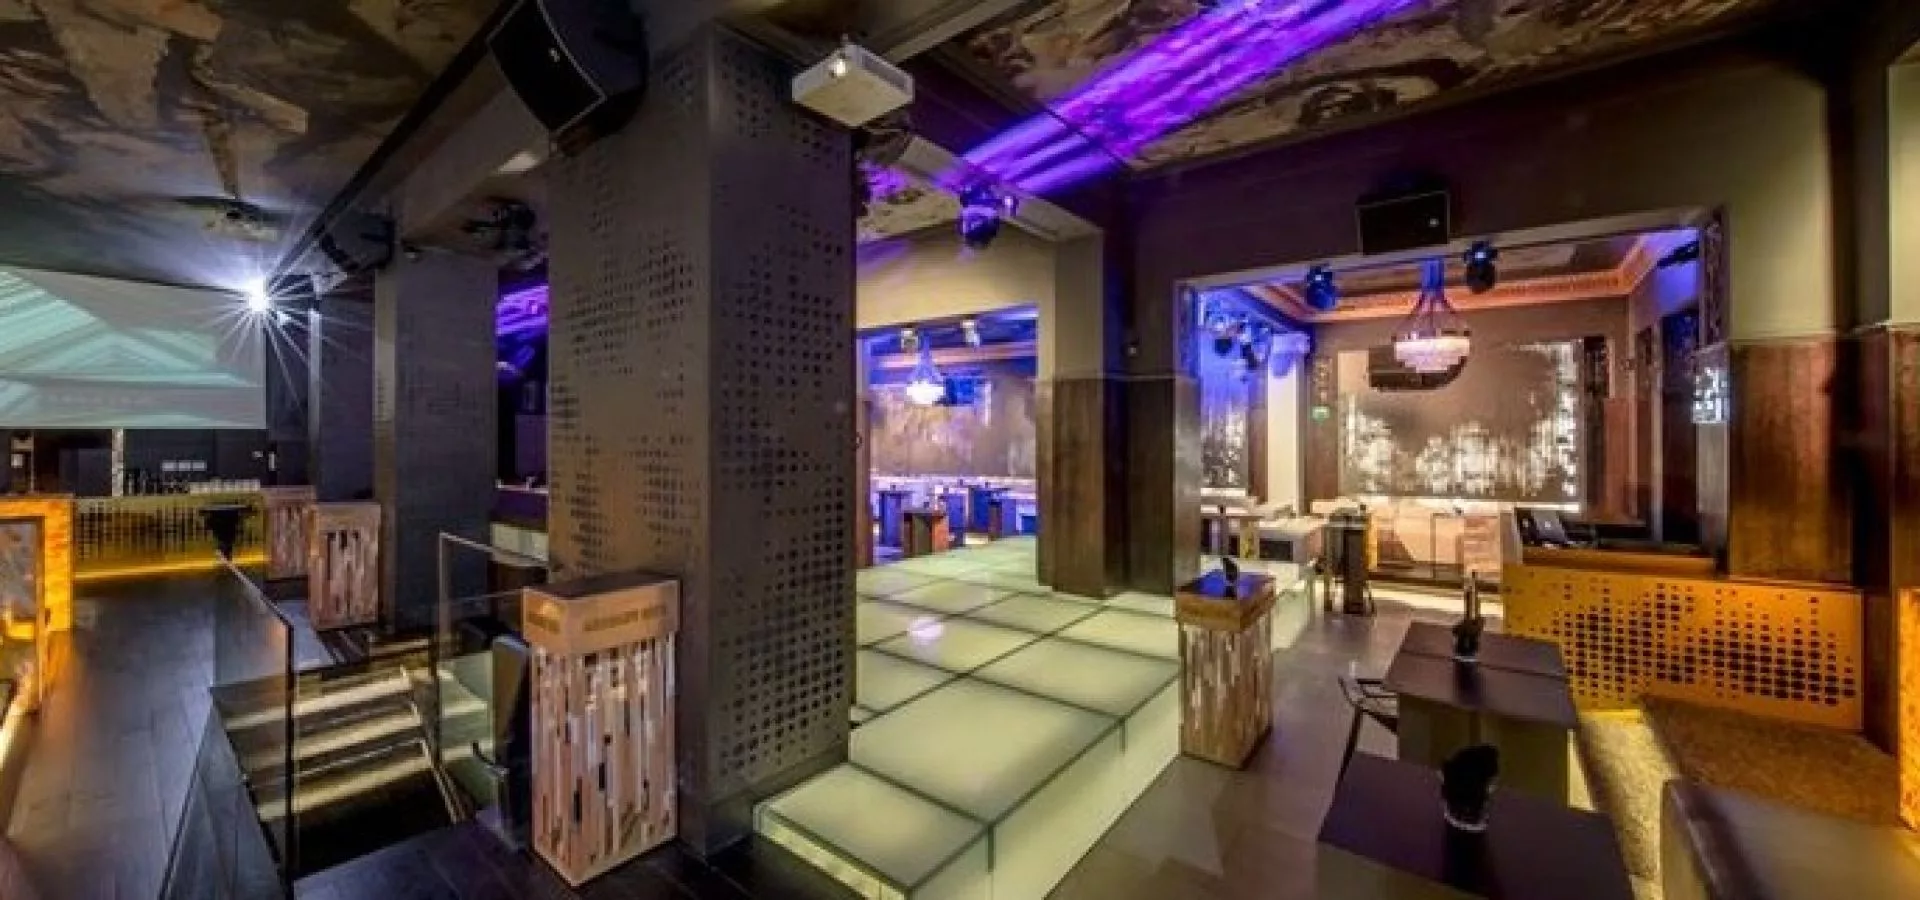 Bedroom Premium in Bulgaria, Europe | Nightclubs,Sex-Friendly Places - Rated 3.1